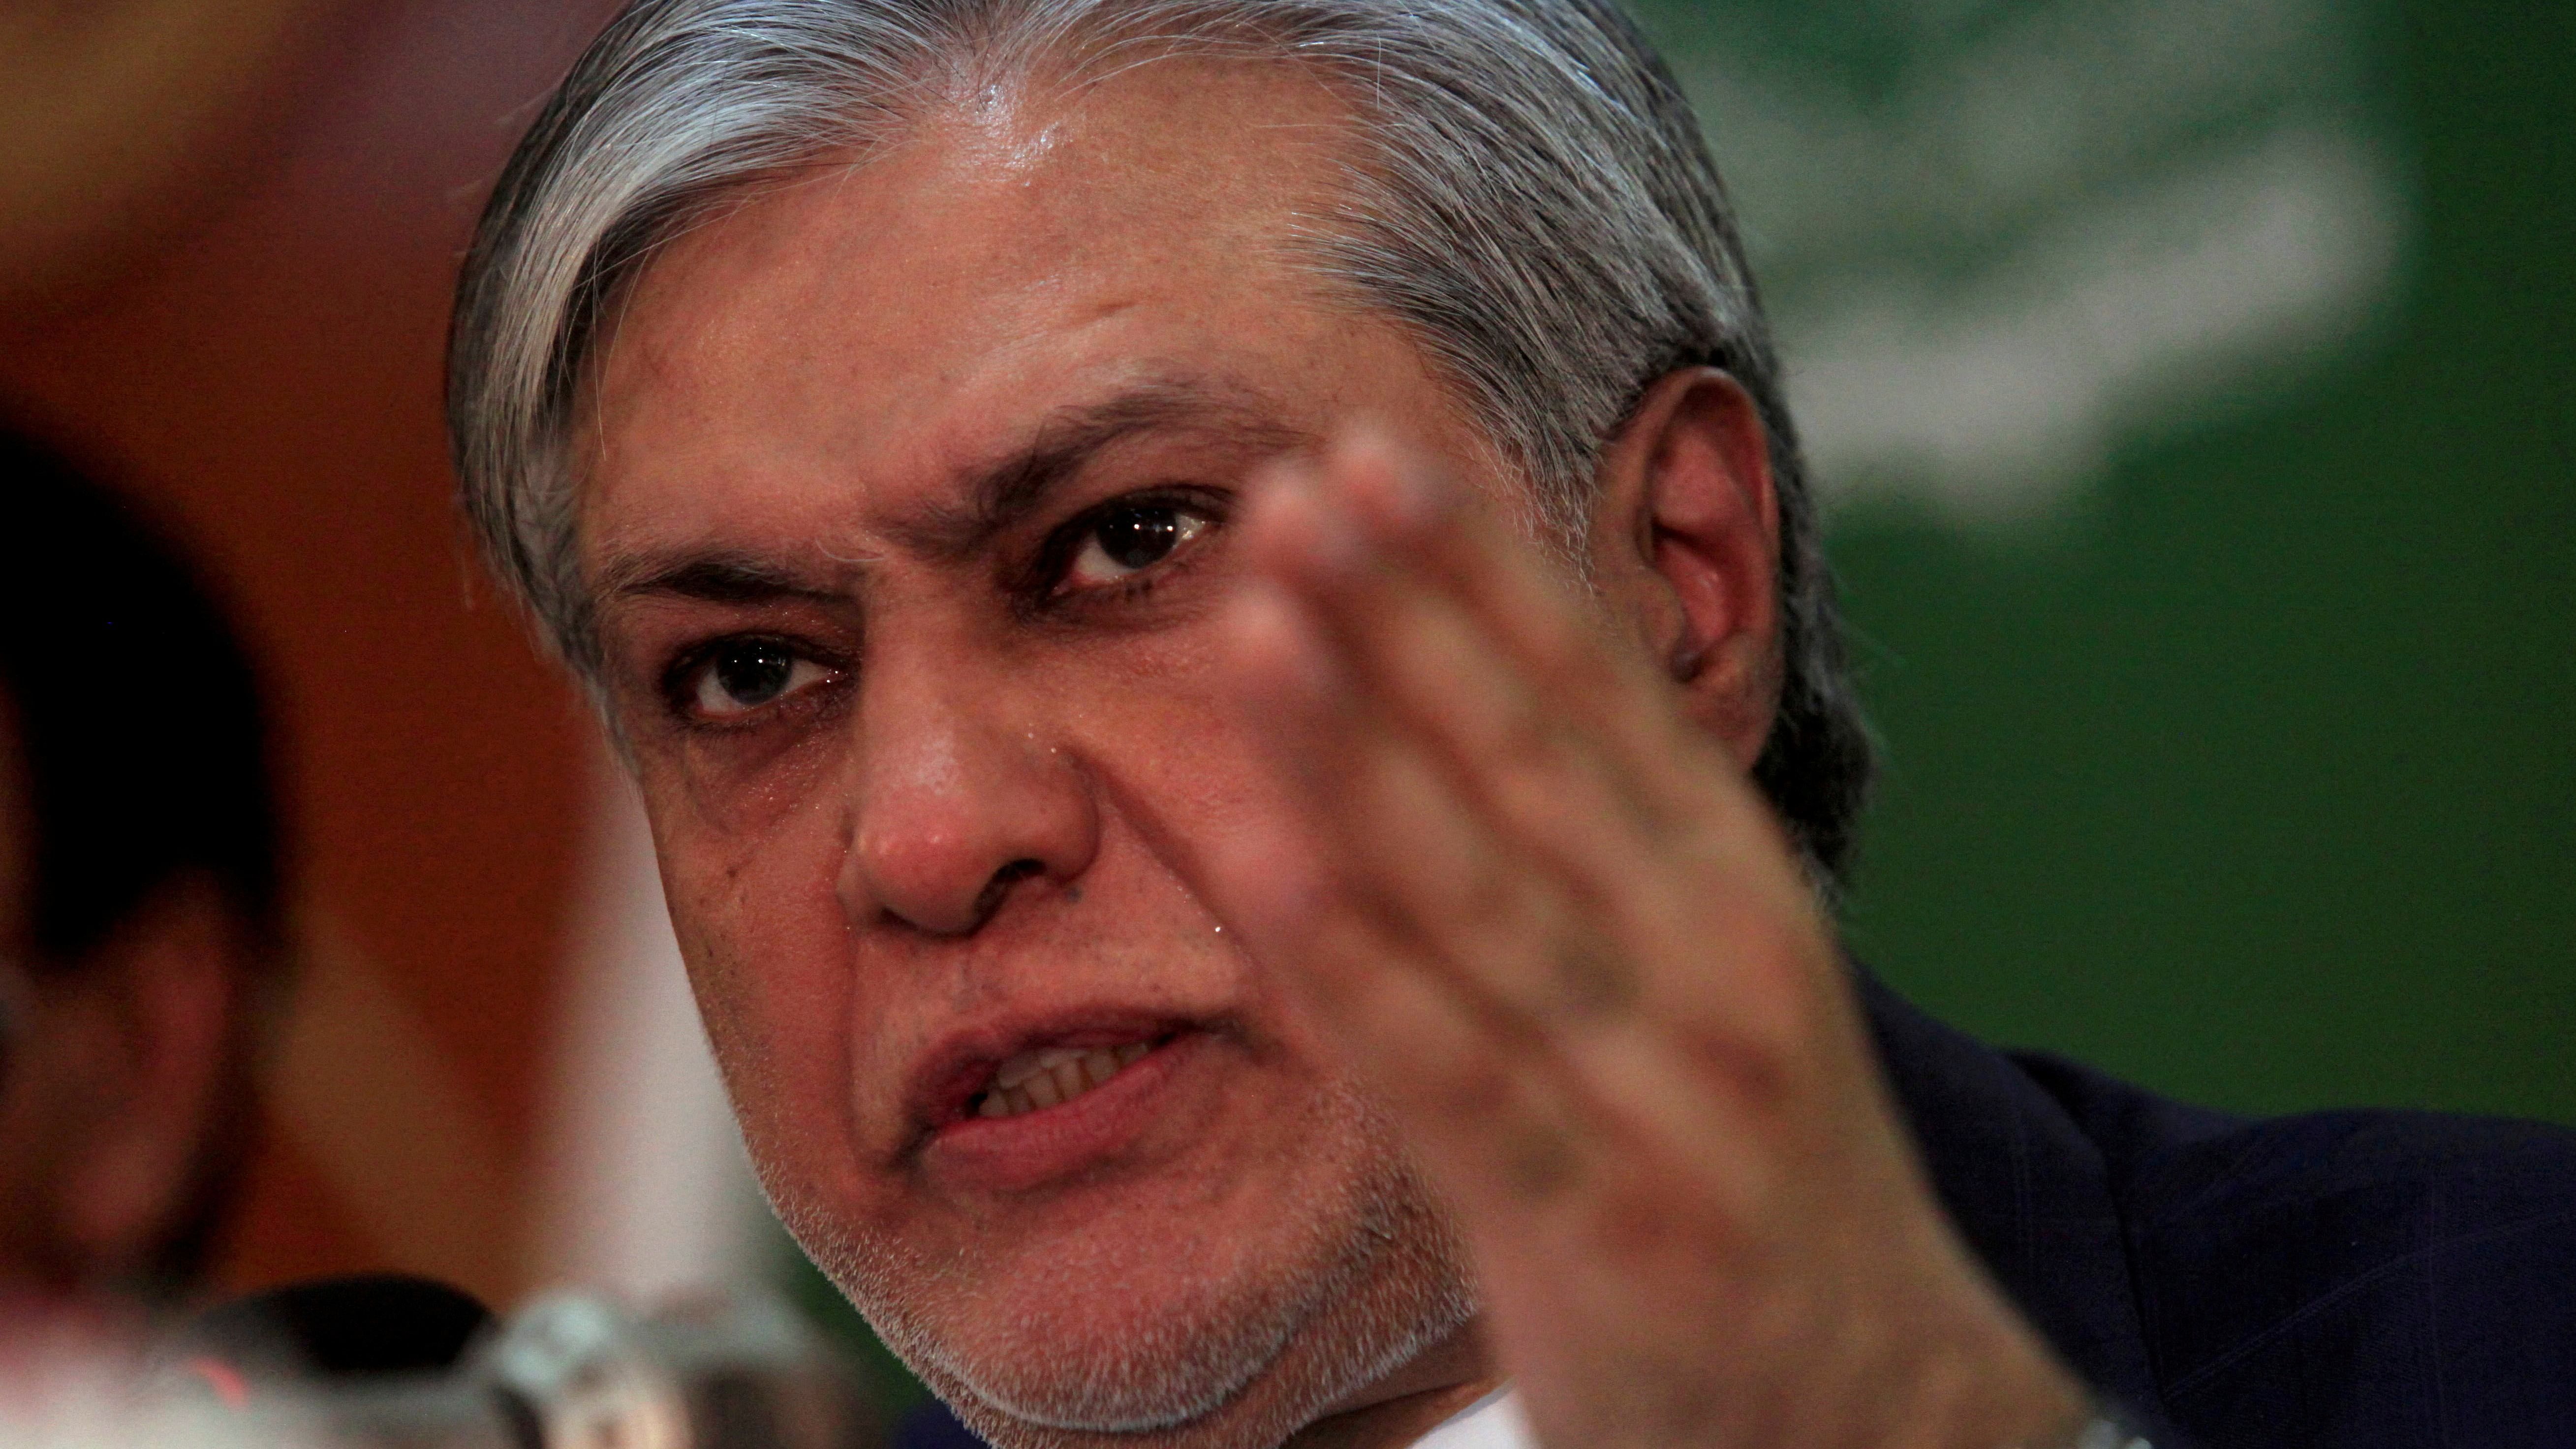 "They promised the security of financial support,” Dar, who recently took over as the new finance minister of Pakistan from his predecessor Miftah Ismail, said. Credit: Reuters Photo